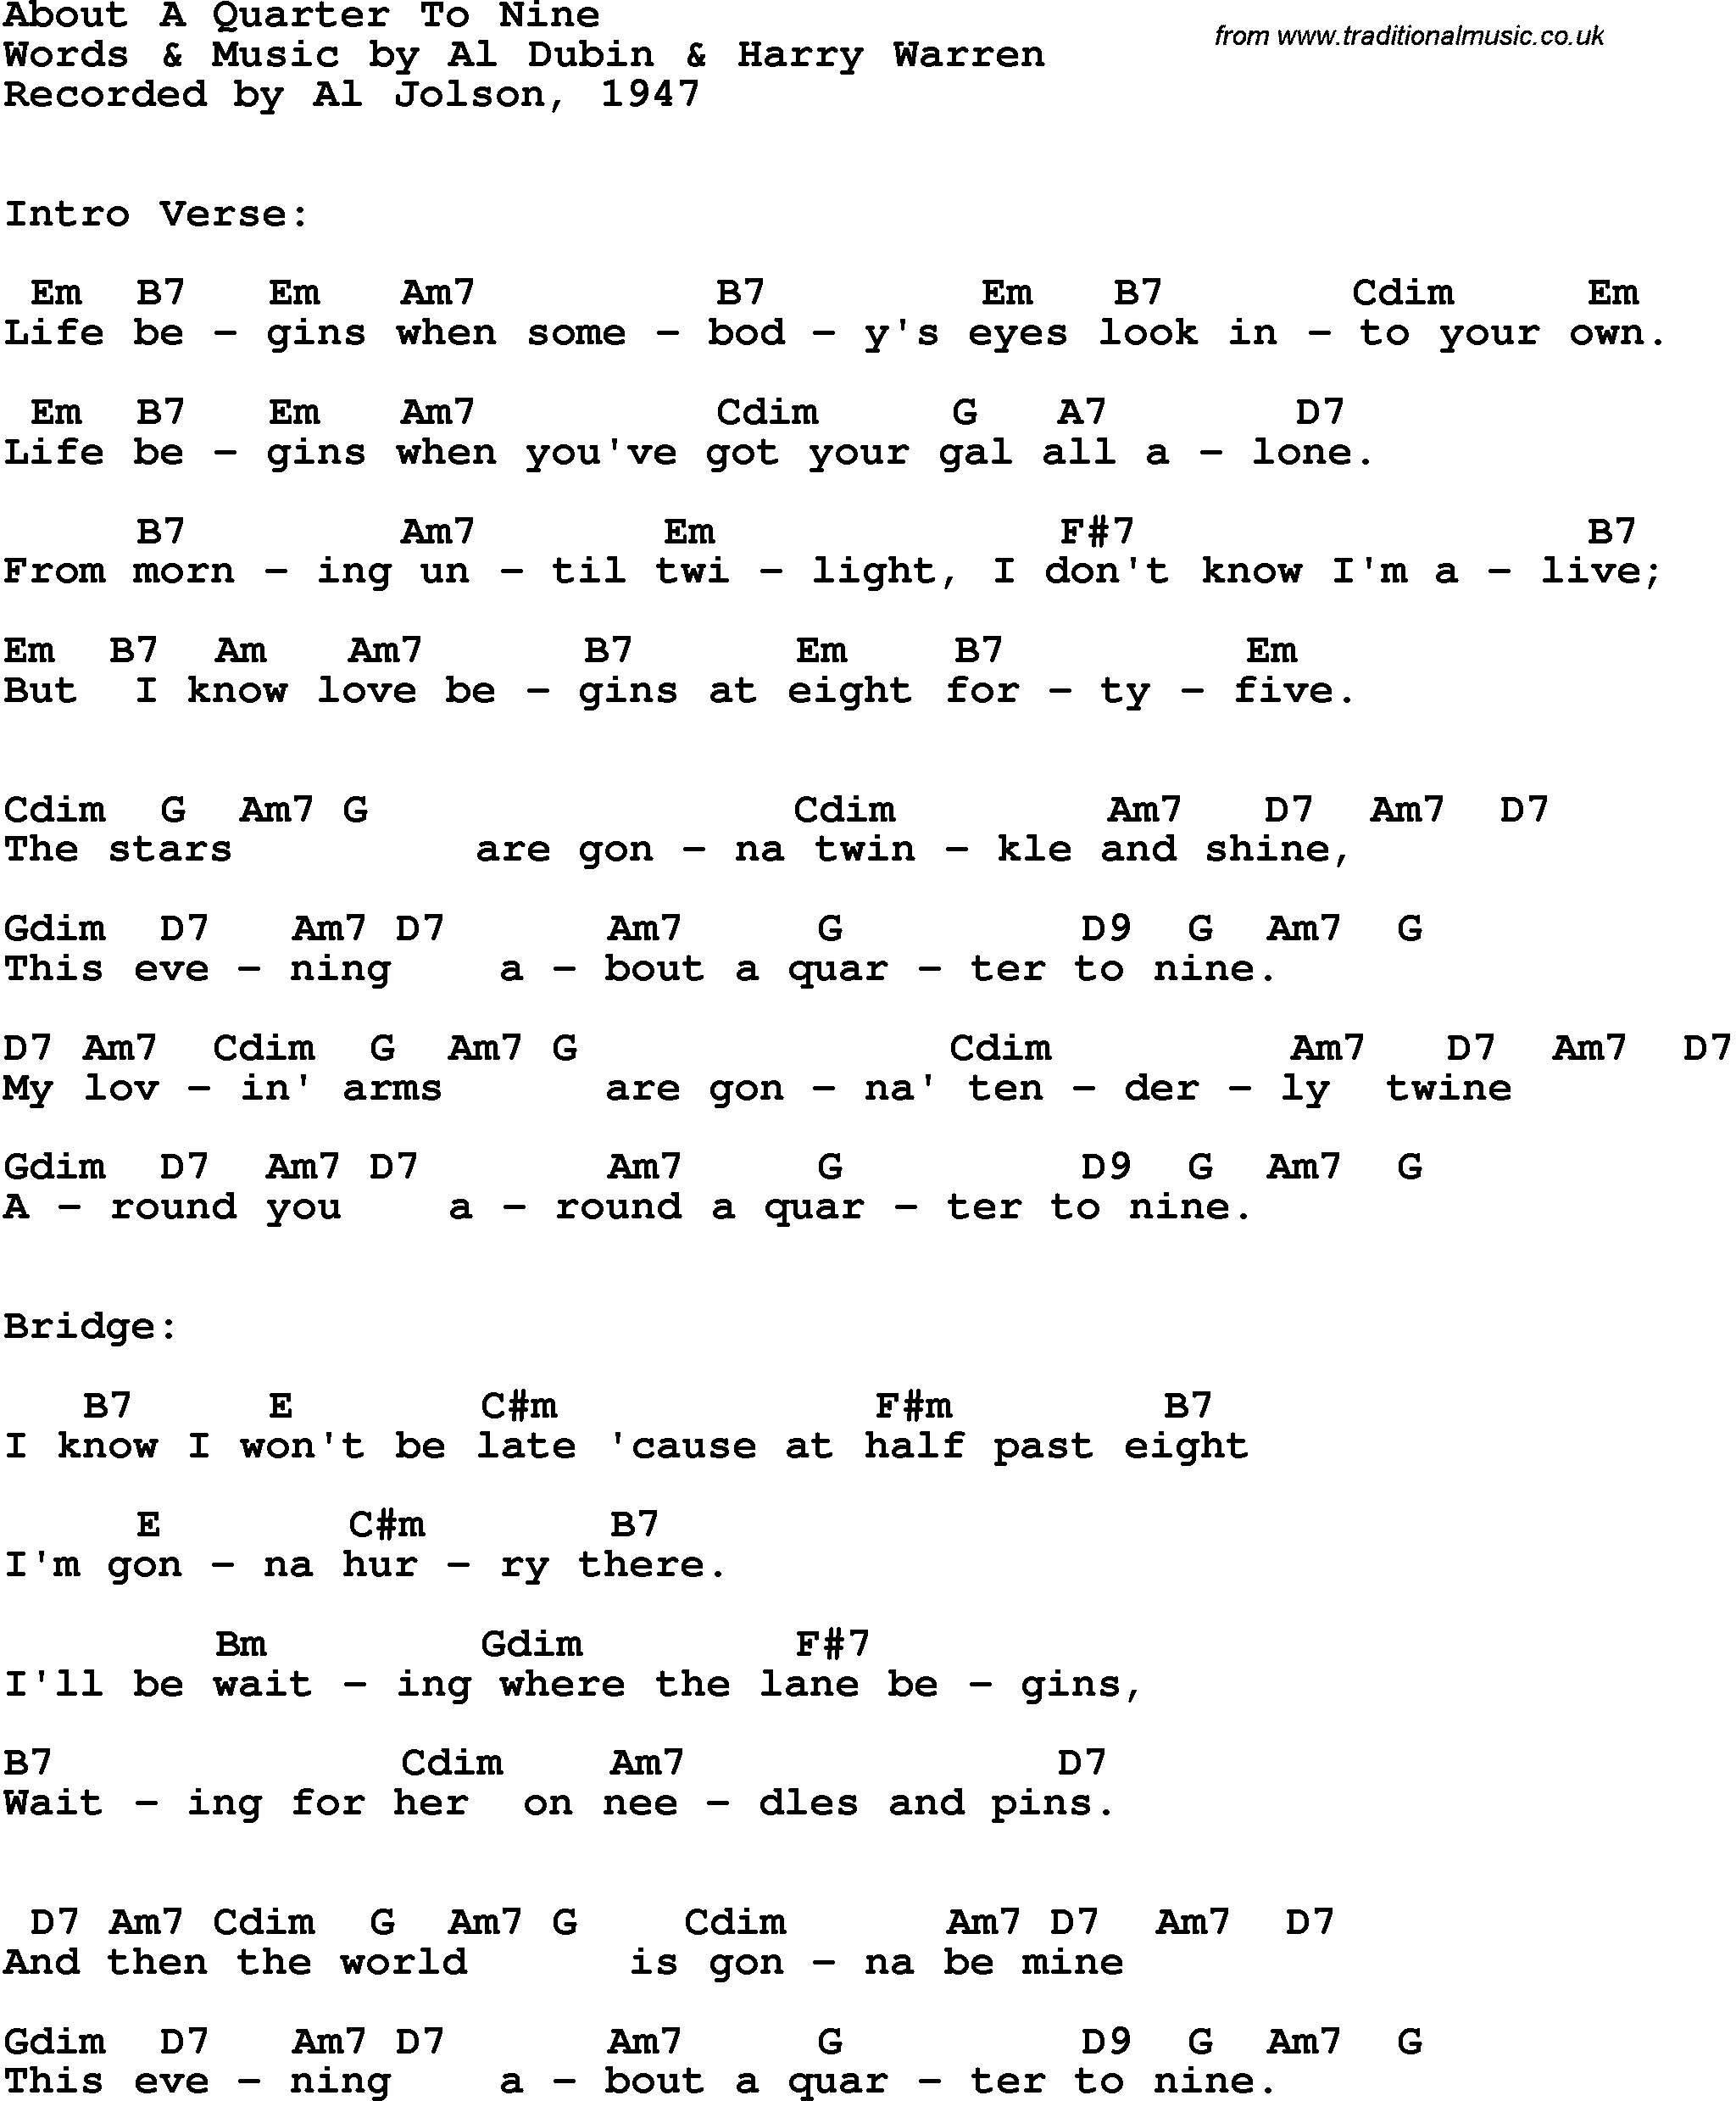 Song Lyrics with guitar chords for About A Quarter To Nine - Al Jolson, 1947